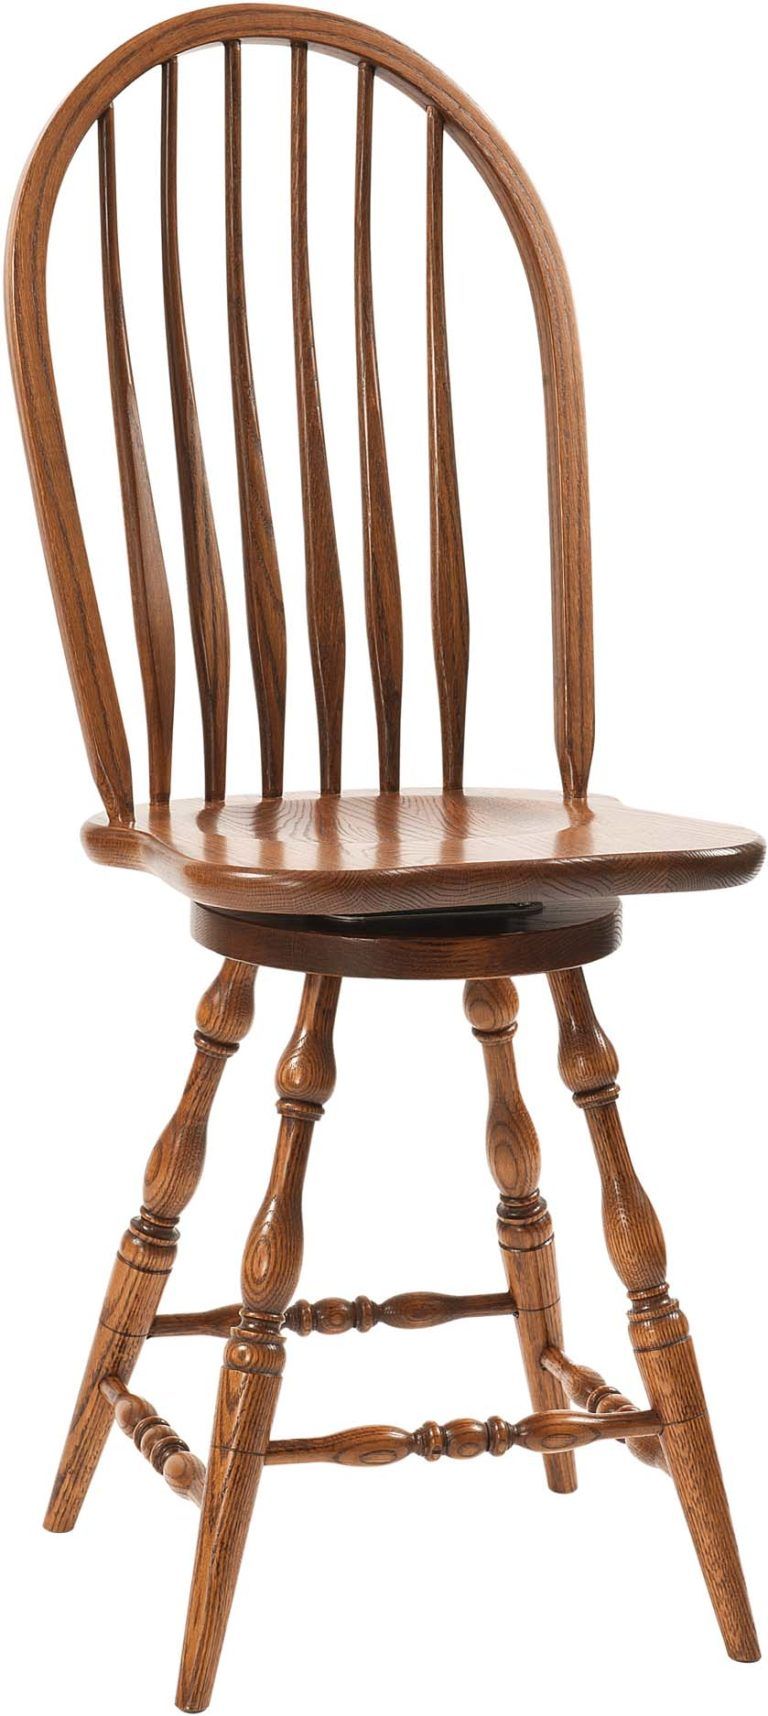 Amish Bent Feather Bow Barstool